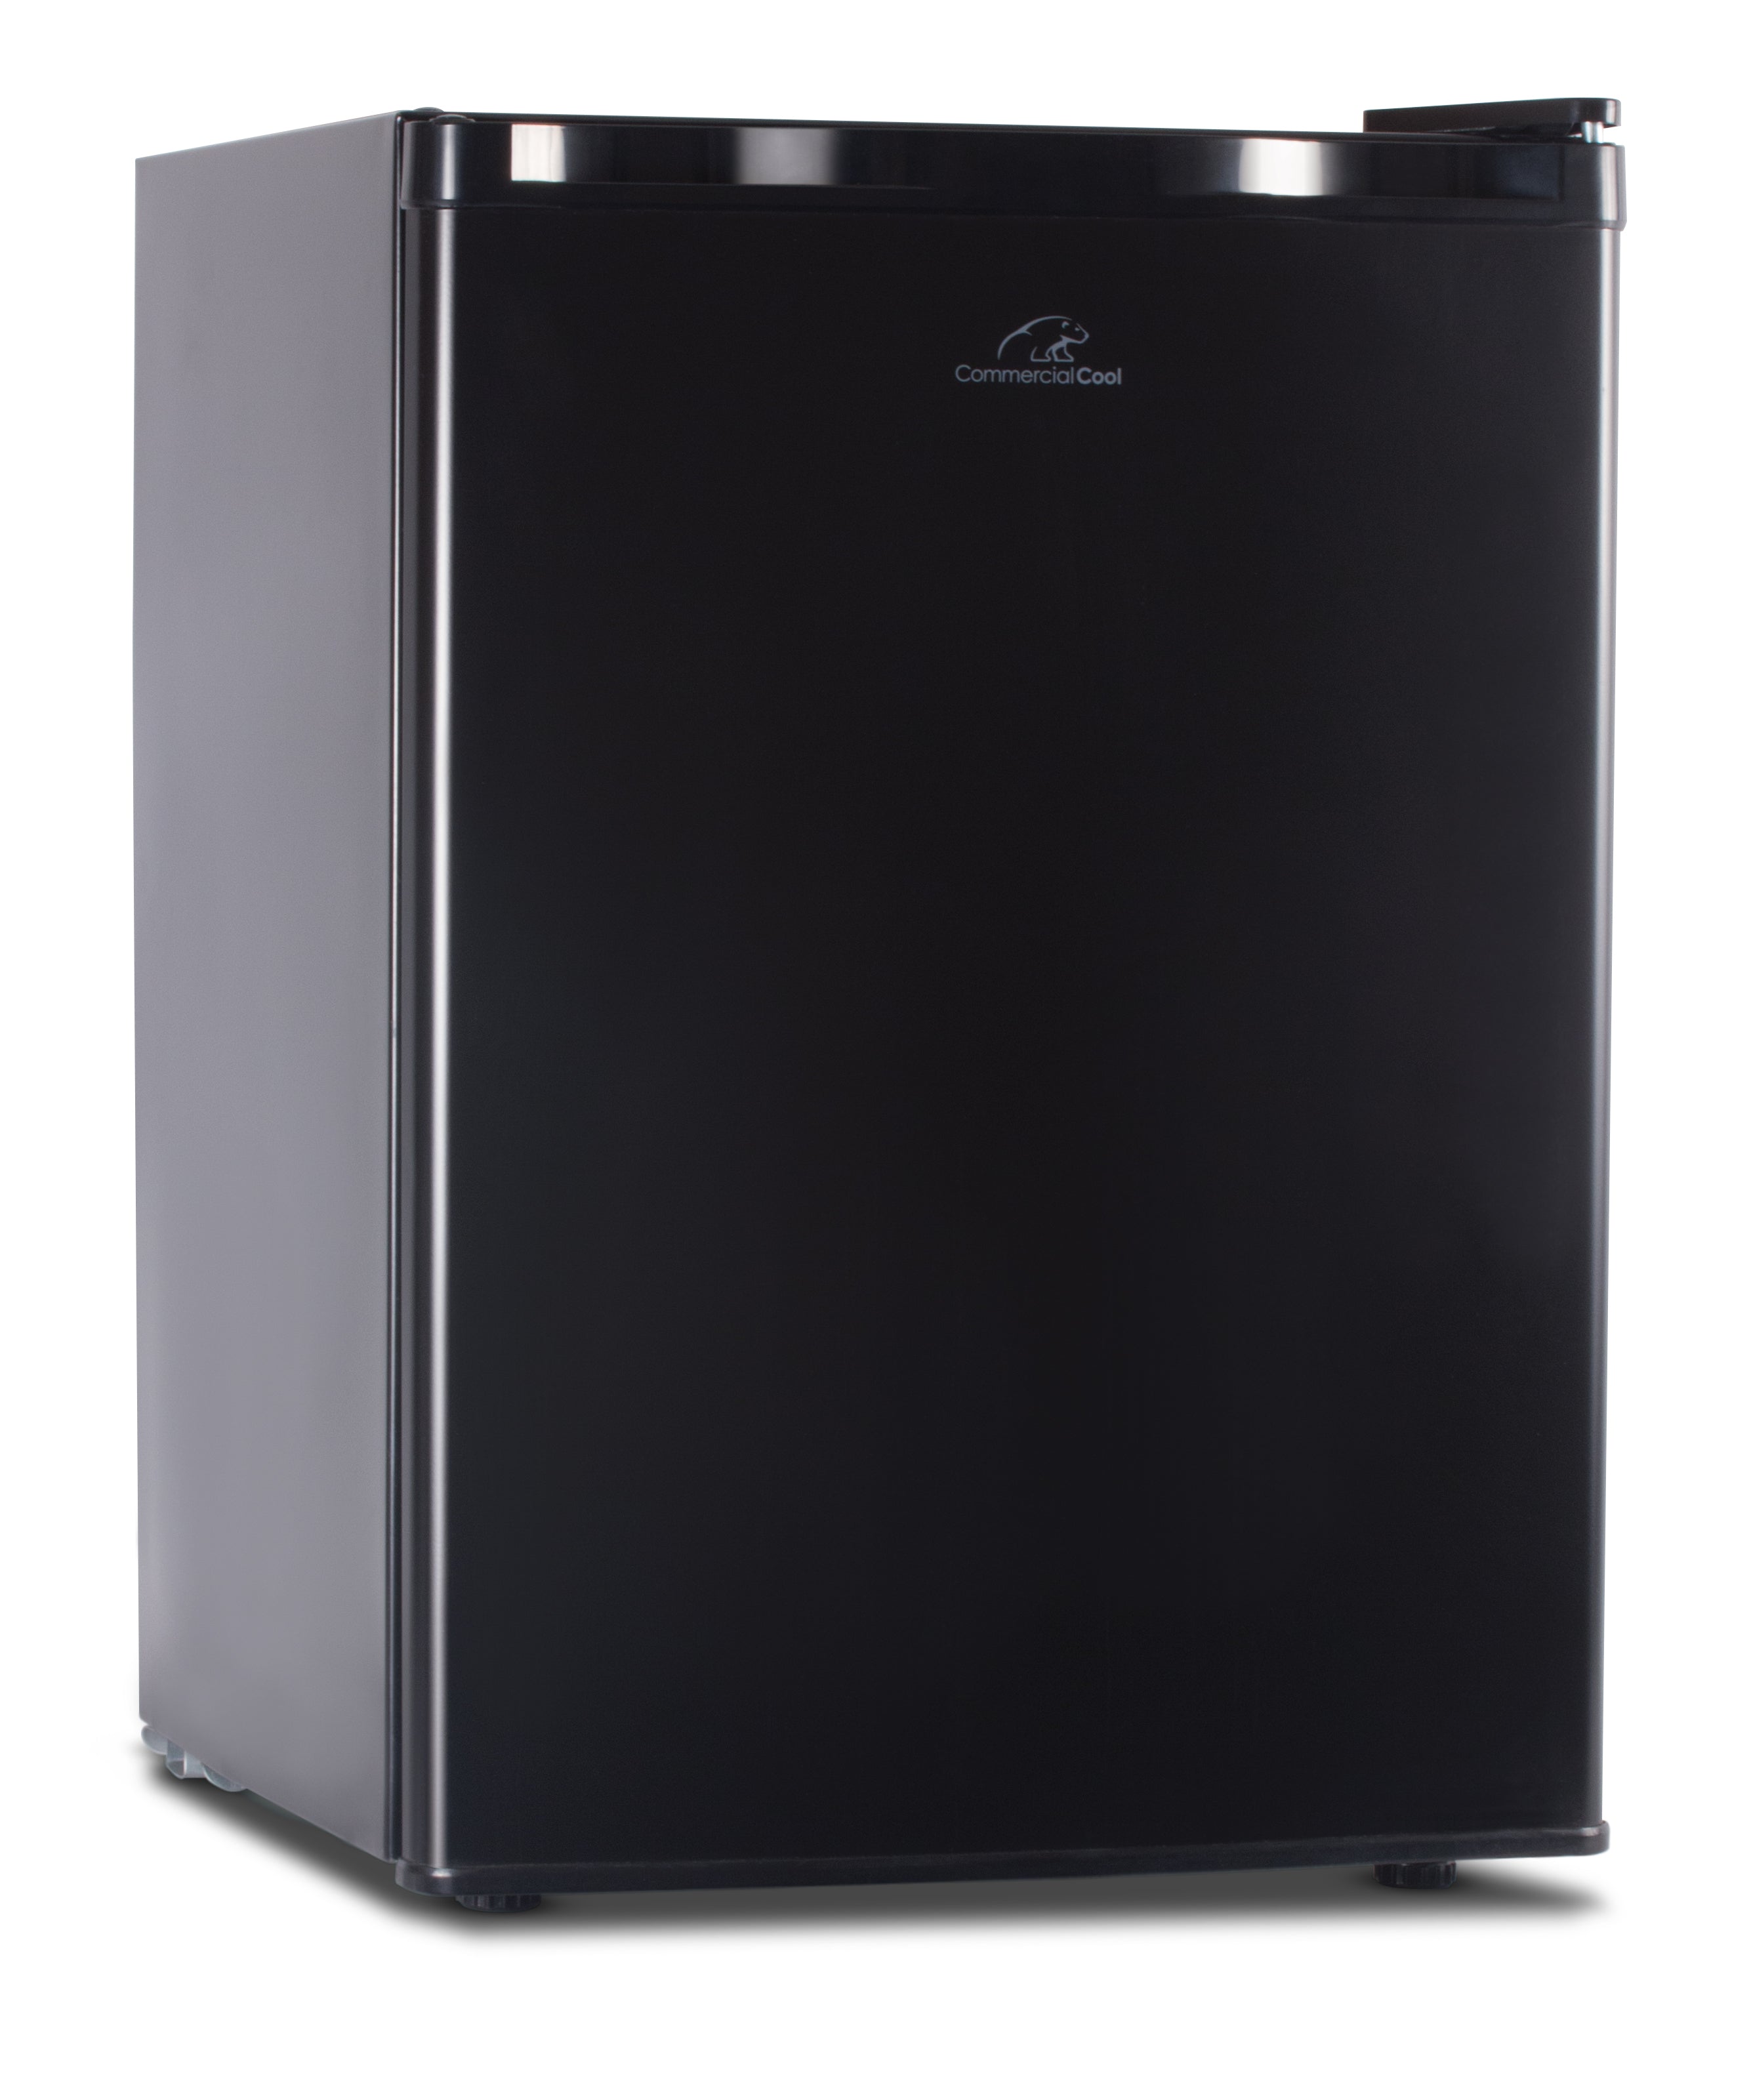 COMMERCIAL COOL Refrigerator and Freezer 2.6 Cu. Ft., Black